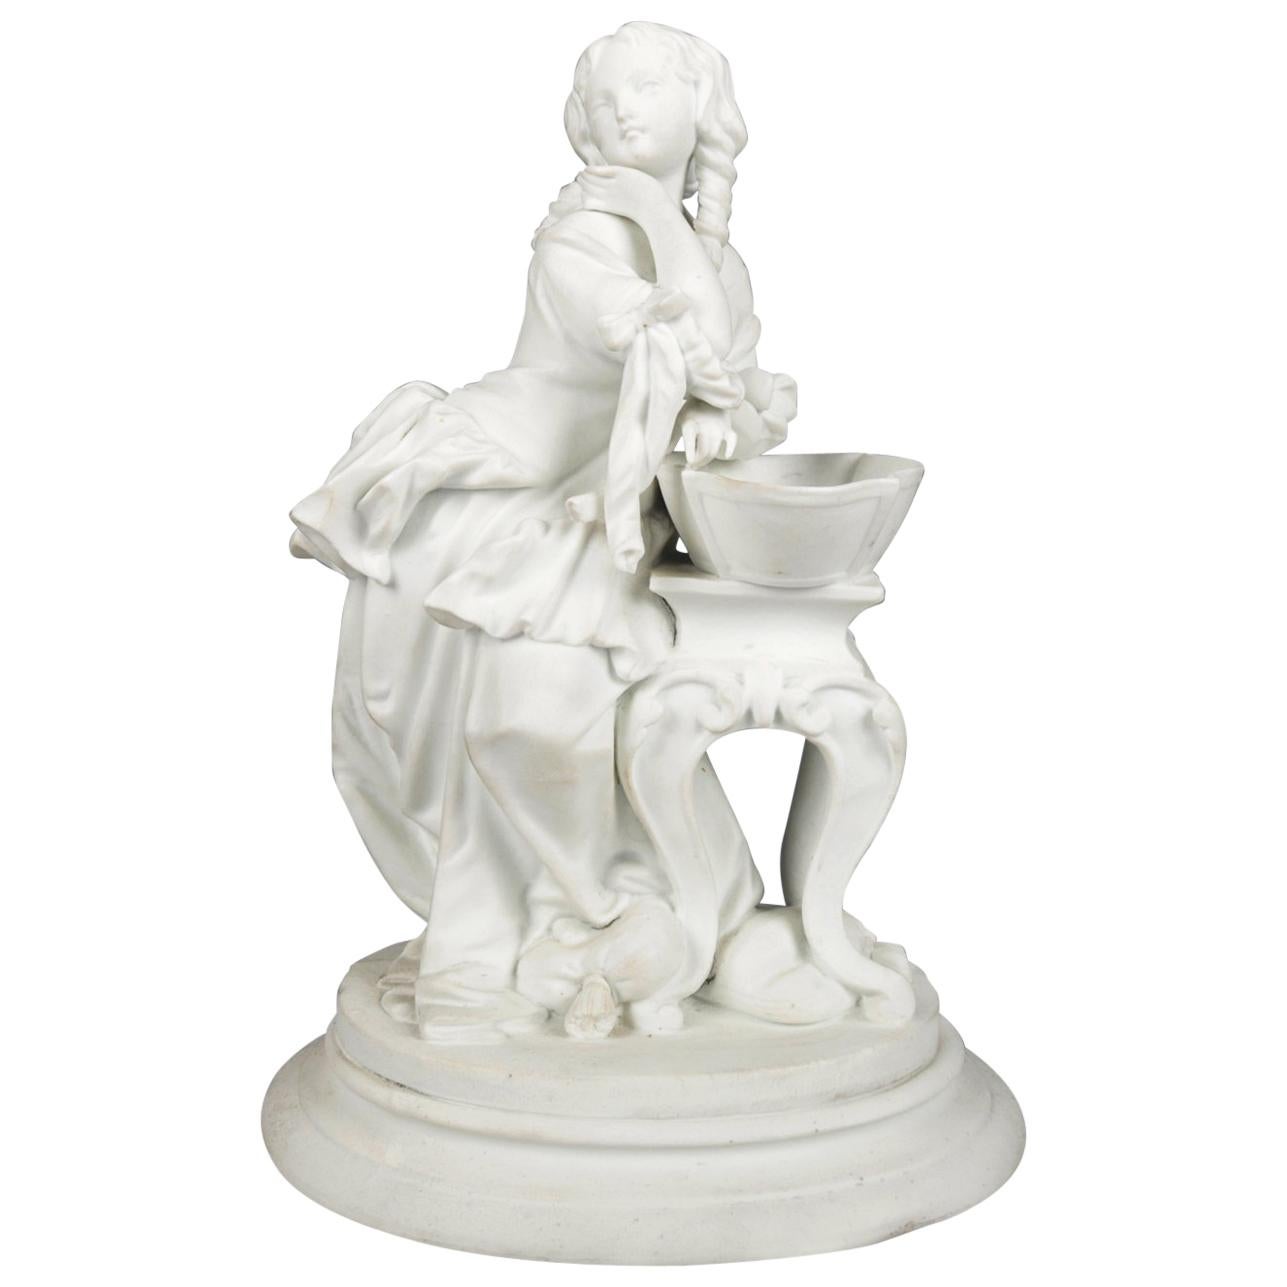 Antique English Parian Figural Genre Grouping of Woman & Washstand, 19th Century